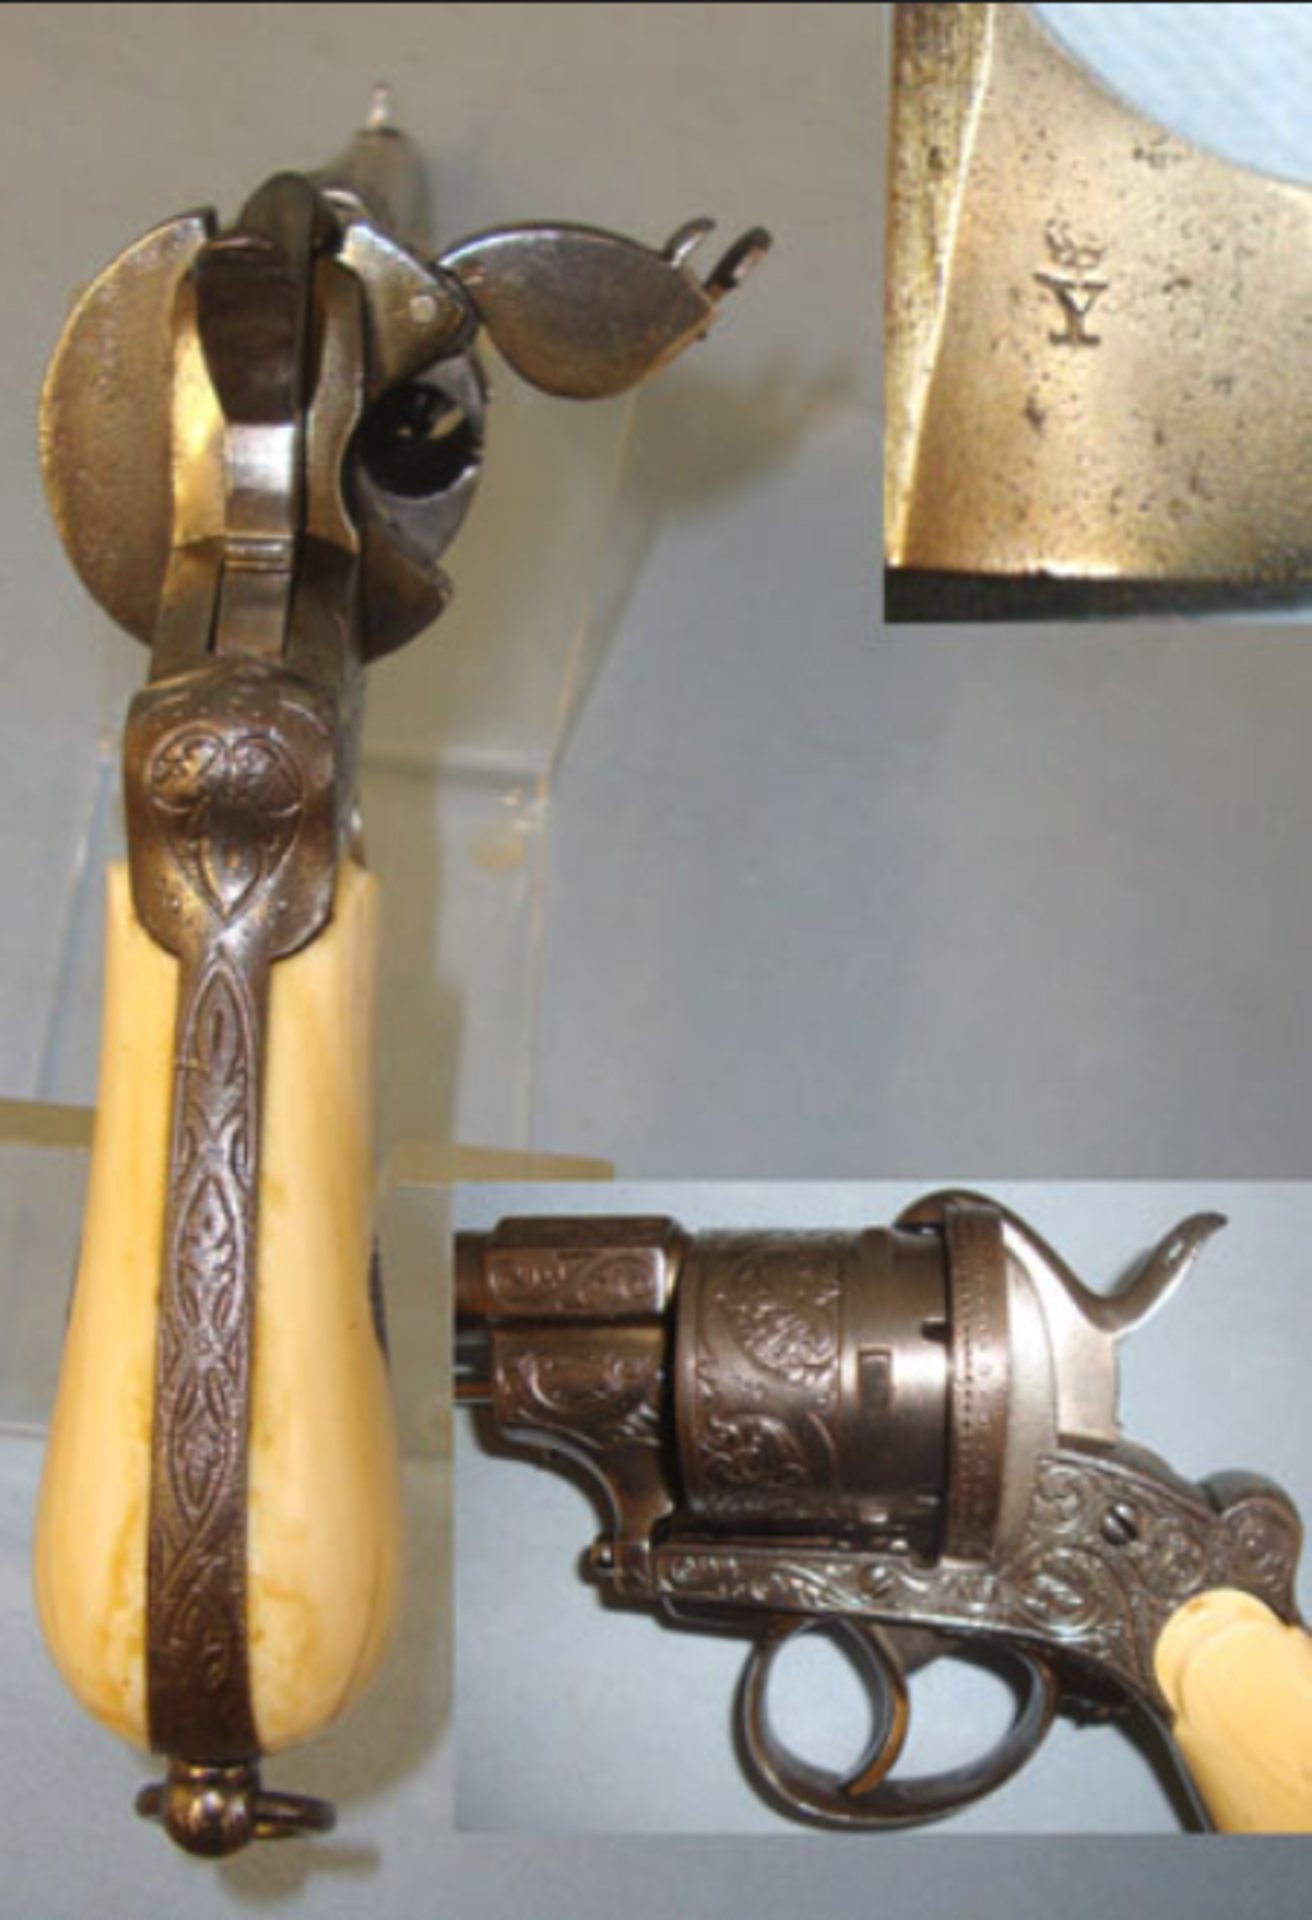 C1870, Continental Military 12mm Calibre Pinfire 6 Shot Revolver With Antique Grips - Image 3 of 3